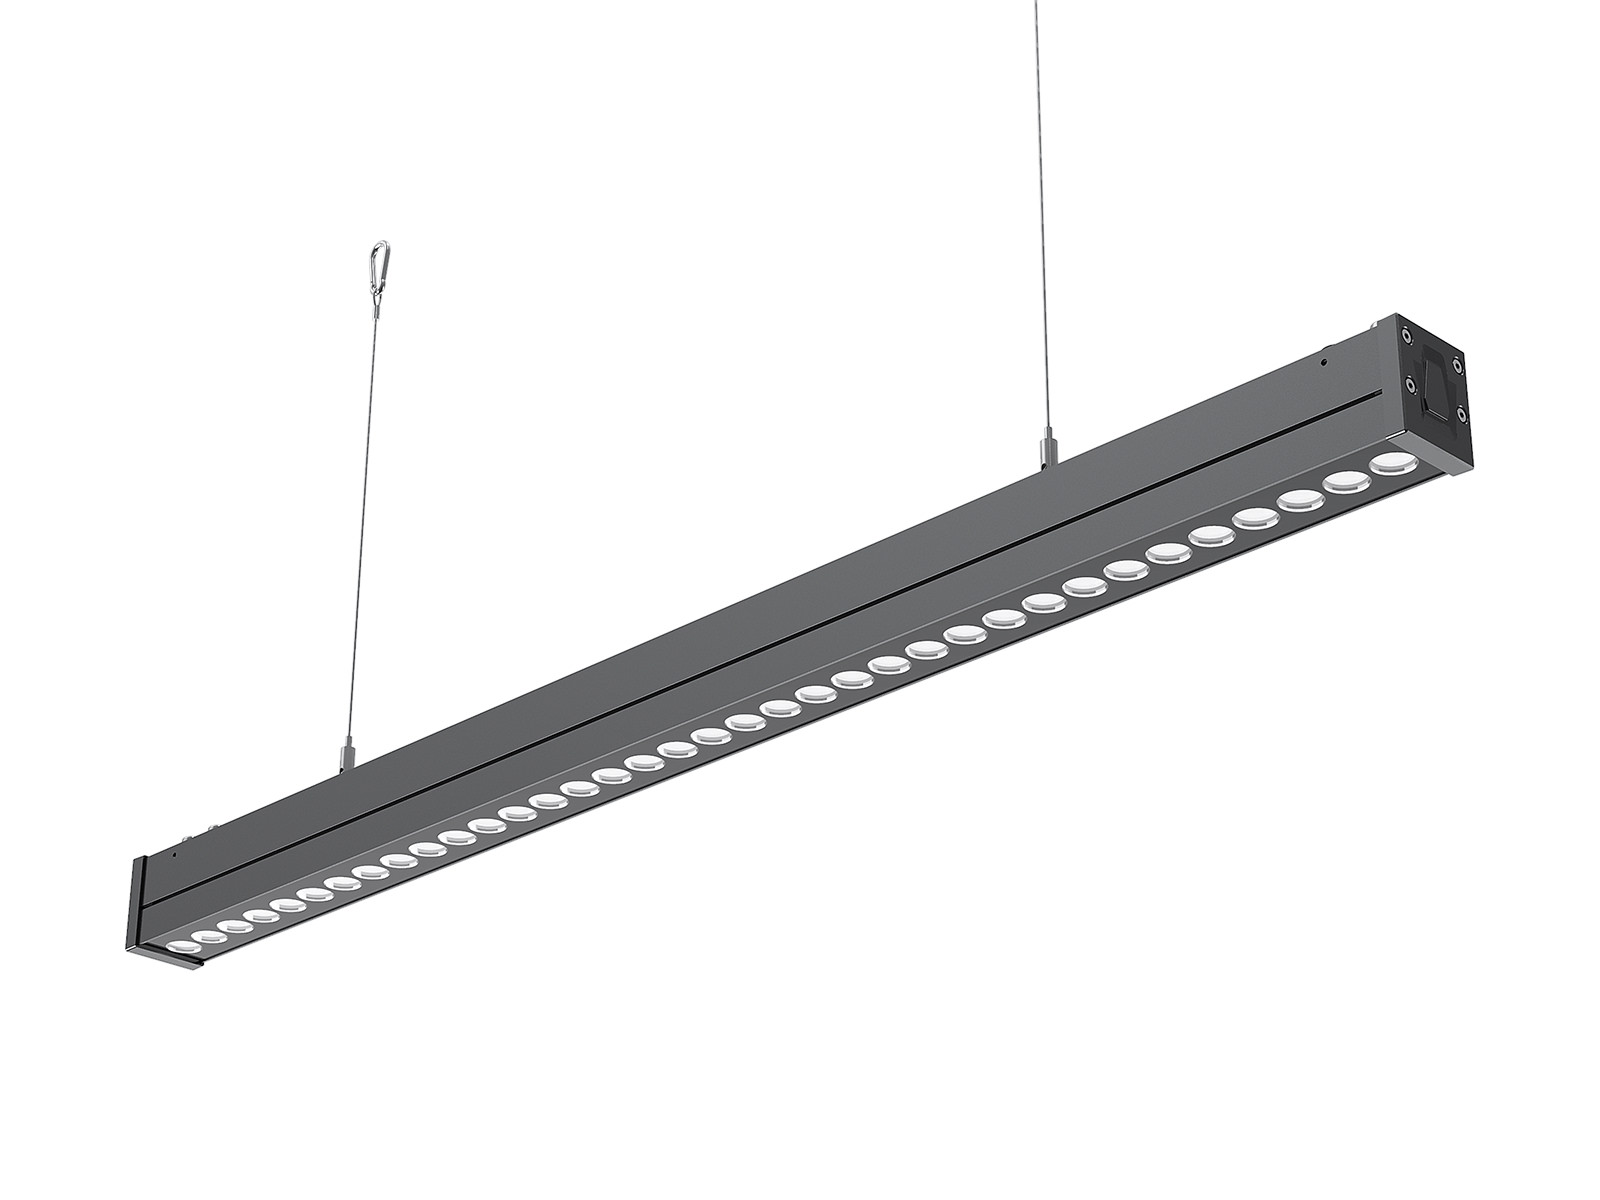 LED wall washer for landscape lighting with narrow beams to wide beams